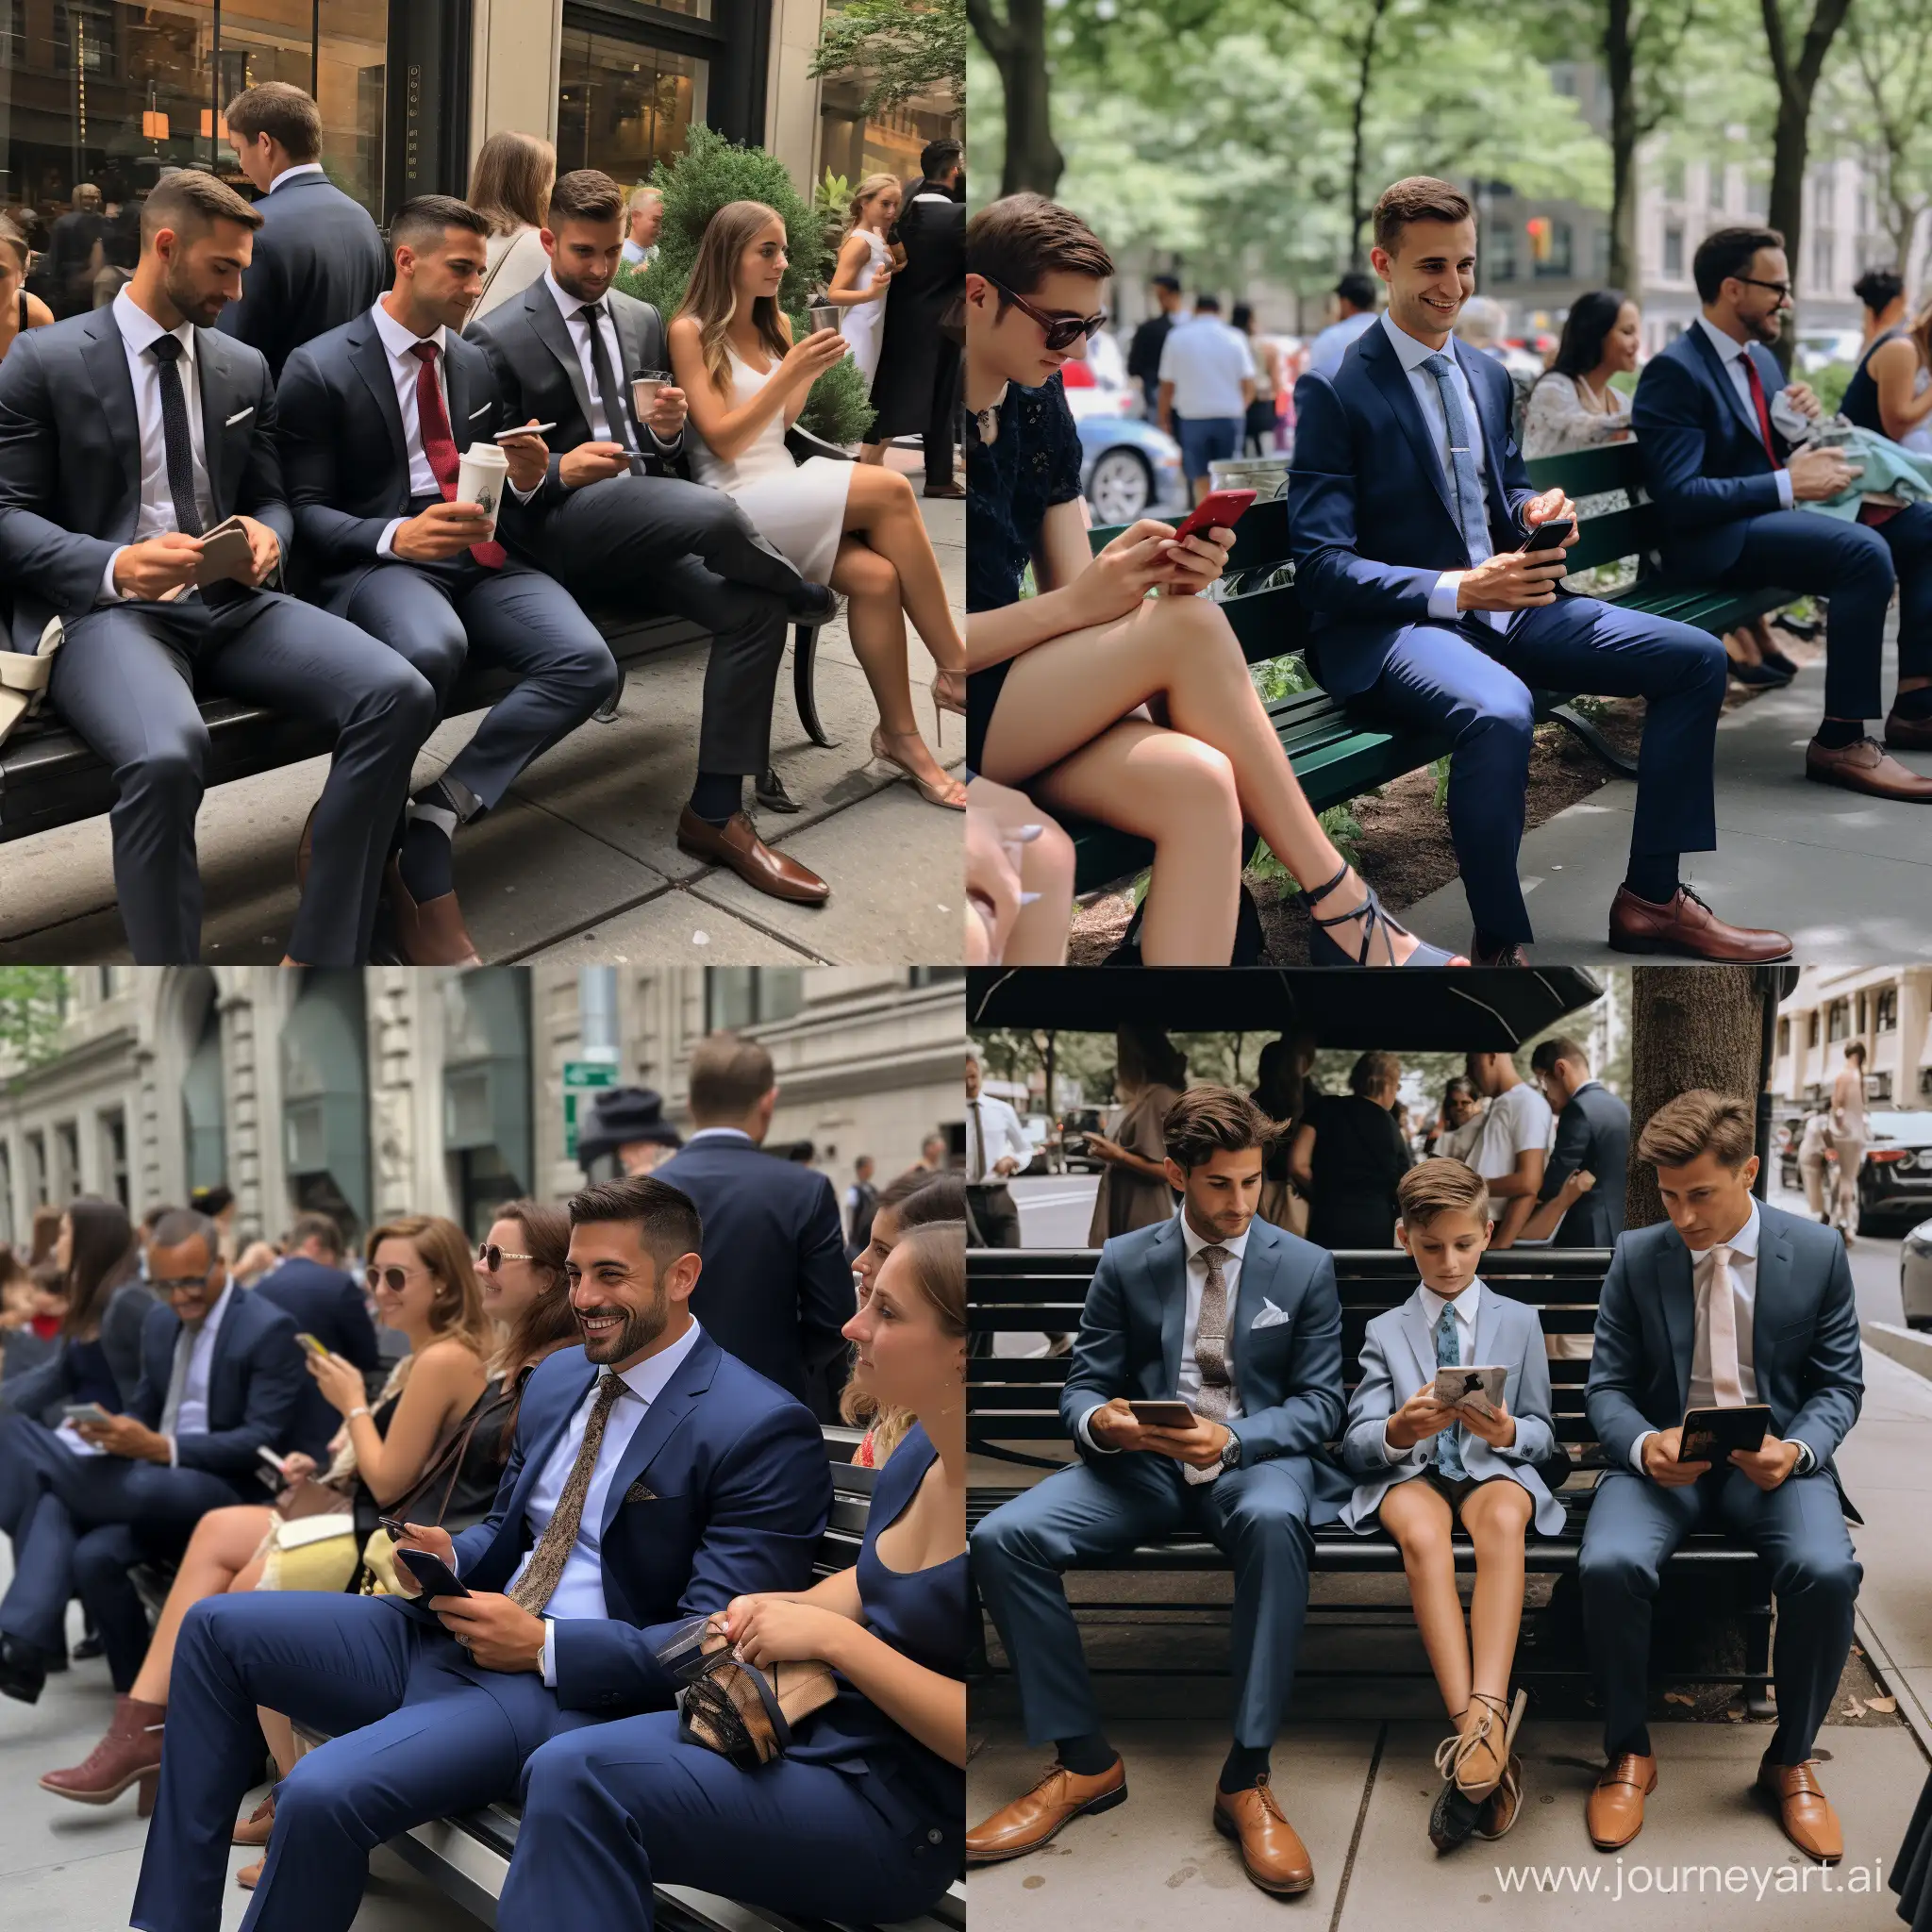 Family-Celebration-at-a-New-York-Wedding-Candid-Moment-Captured-in-2019